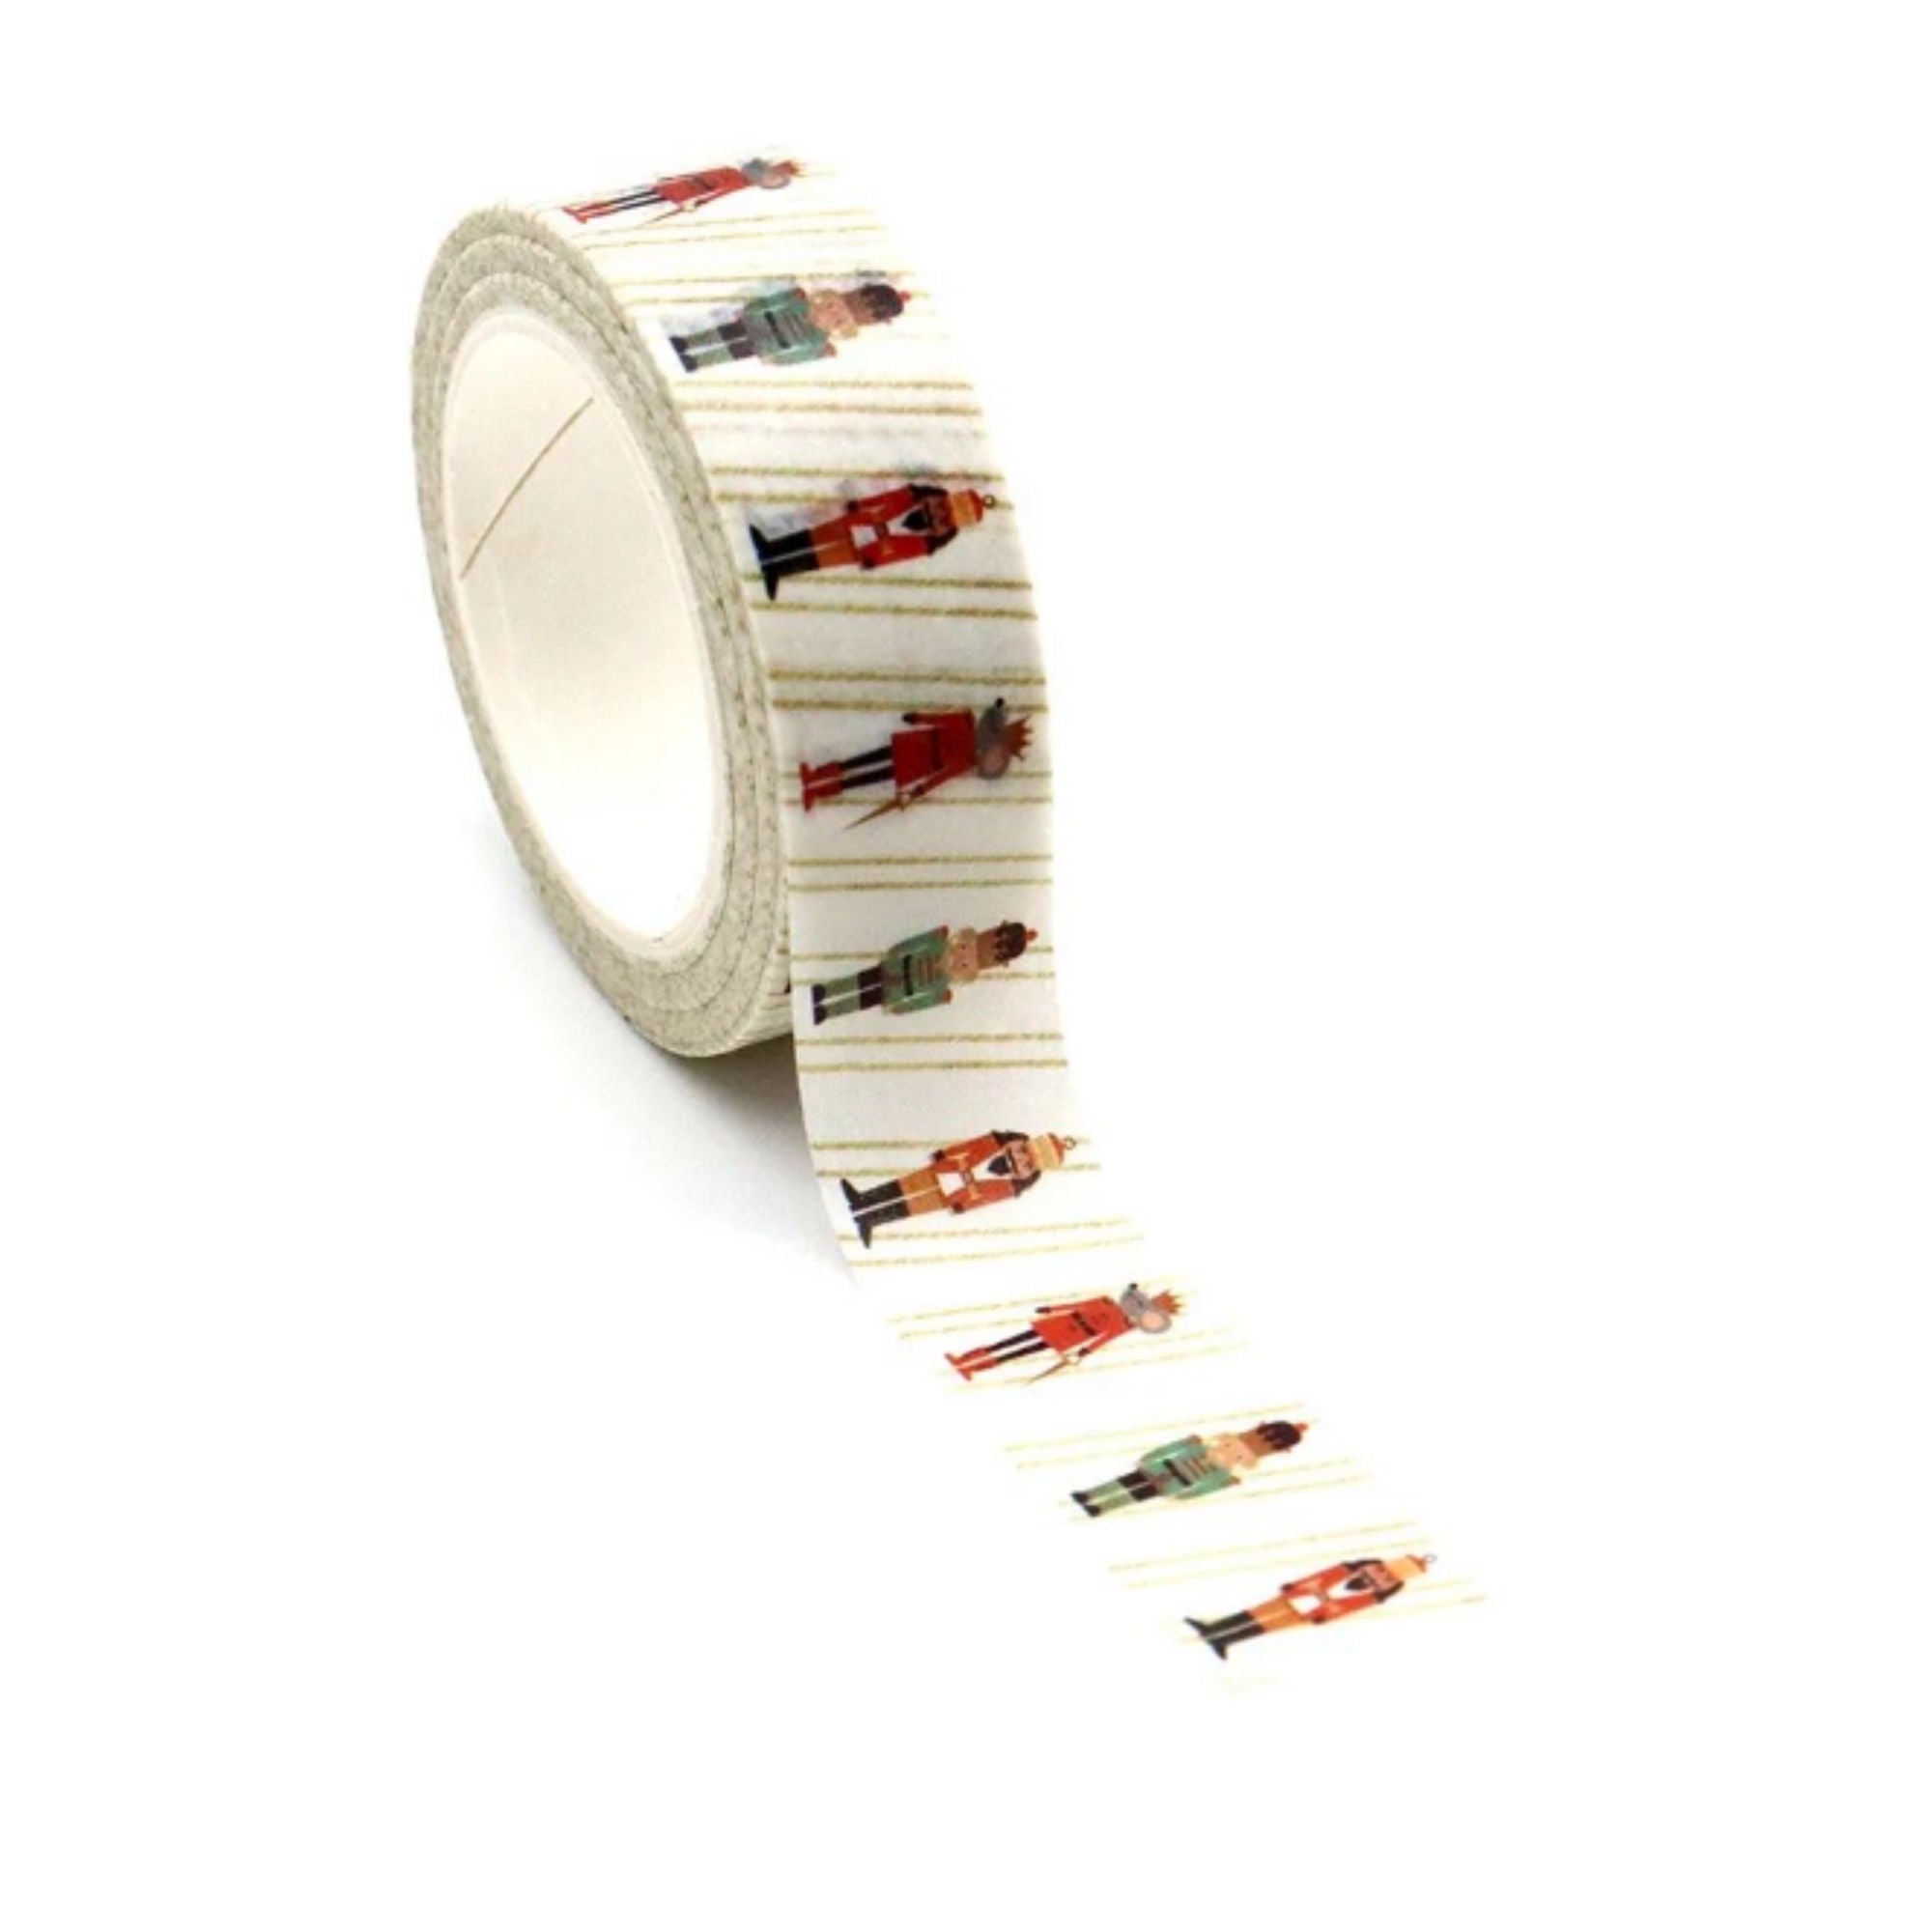 TW Collection Nutcracker Toy Soldier 15mm x 15 Feet Washi Tape by SSC Designs